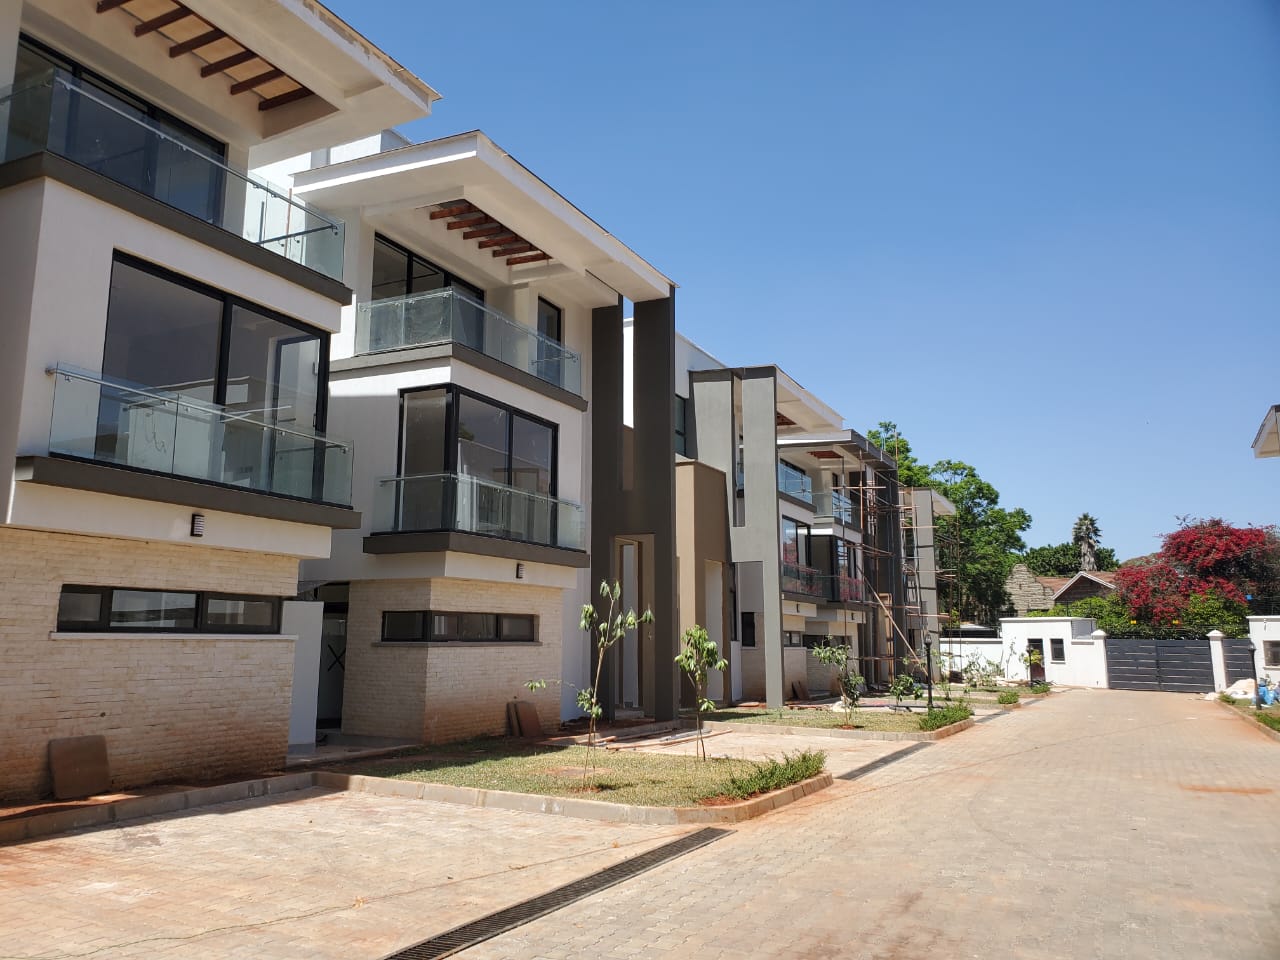 4 Bedroom Townhouses for Sale in Lavington just off James Gichuru in a gated community of 8 homes impeccably built over a 0.97 acre (7)